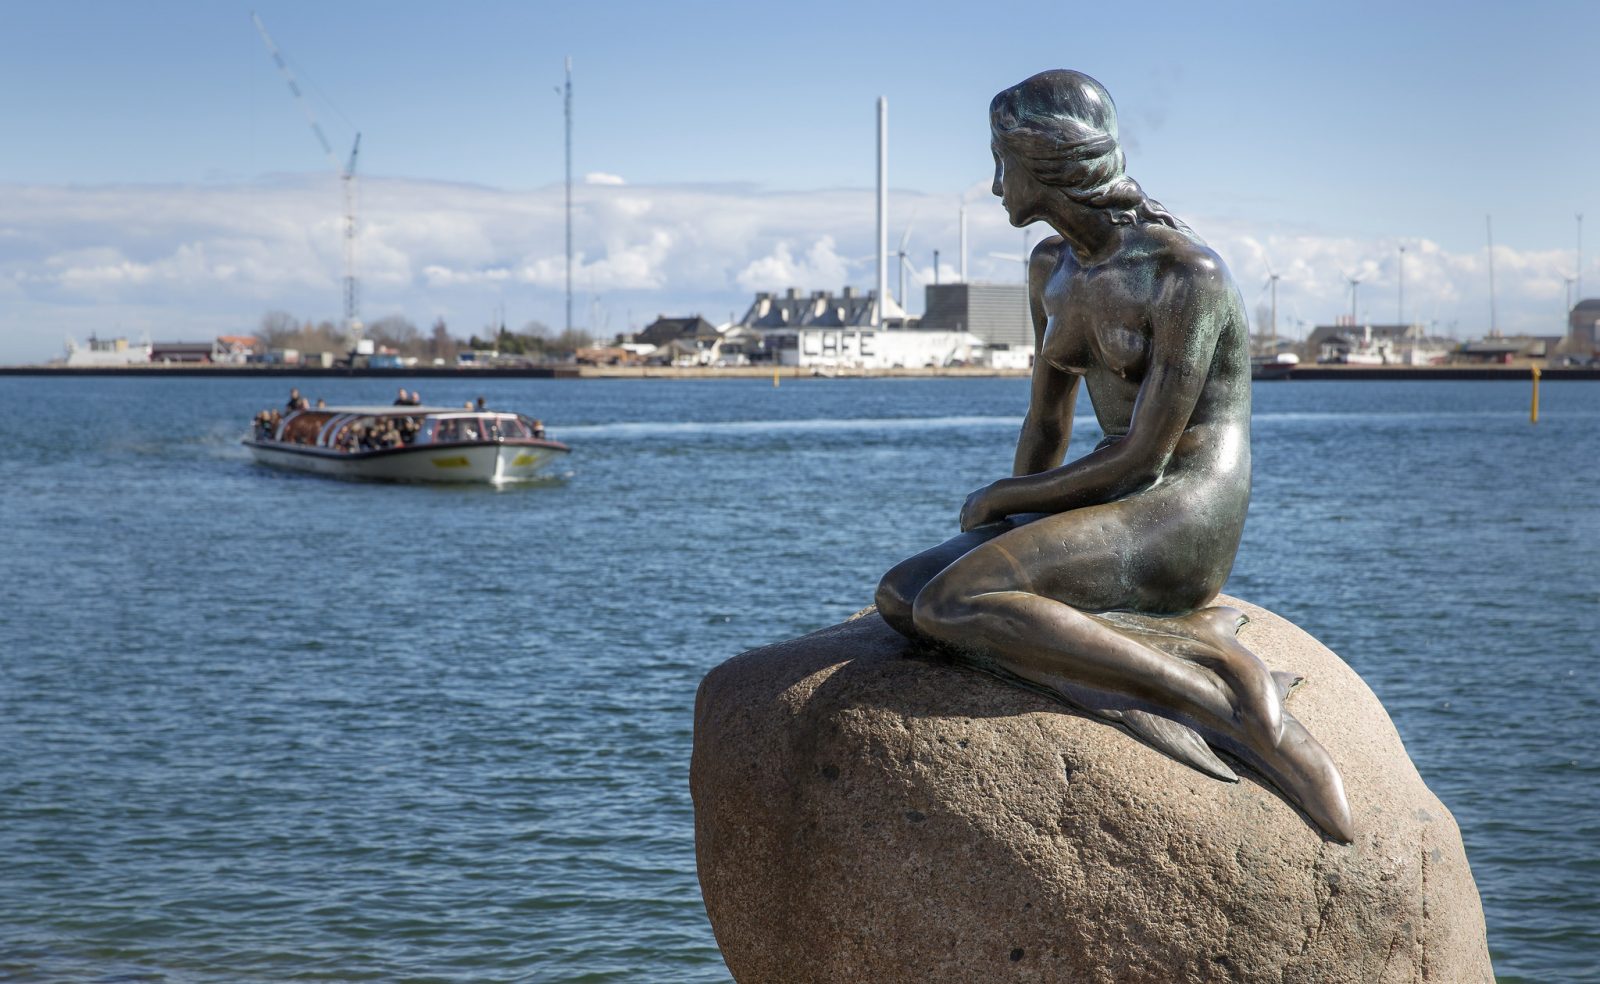 Only the Super Smart Will Score Better Than 17/24 on This Geography Quiz The Little Mermaid Statue In Copenhagen, Denmark